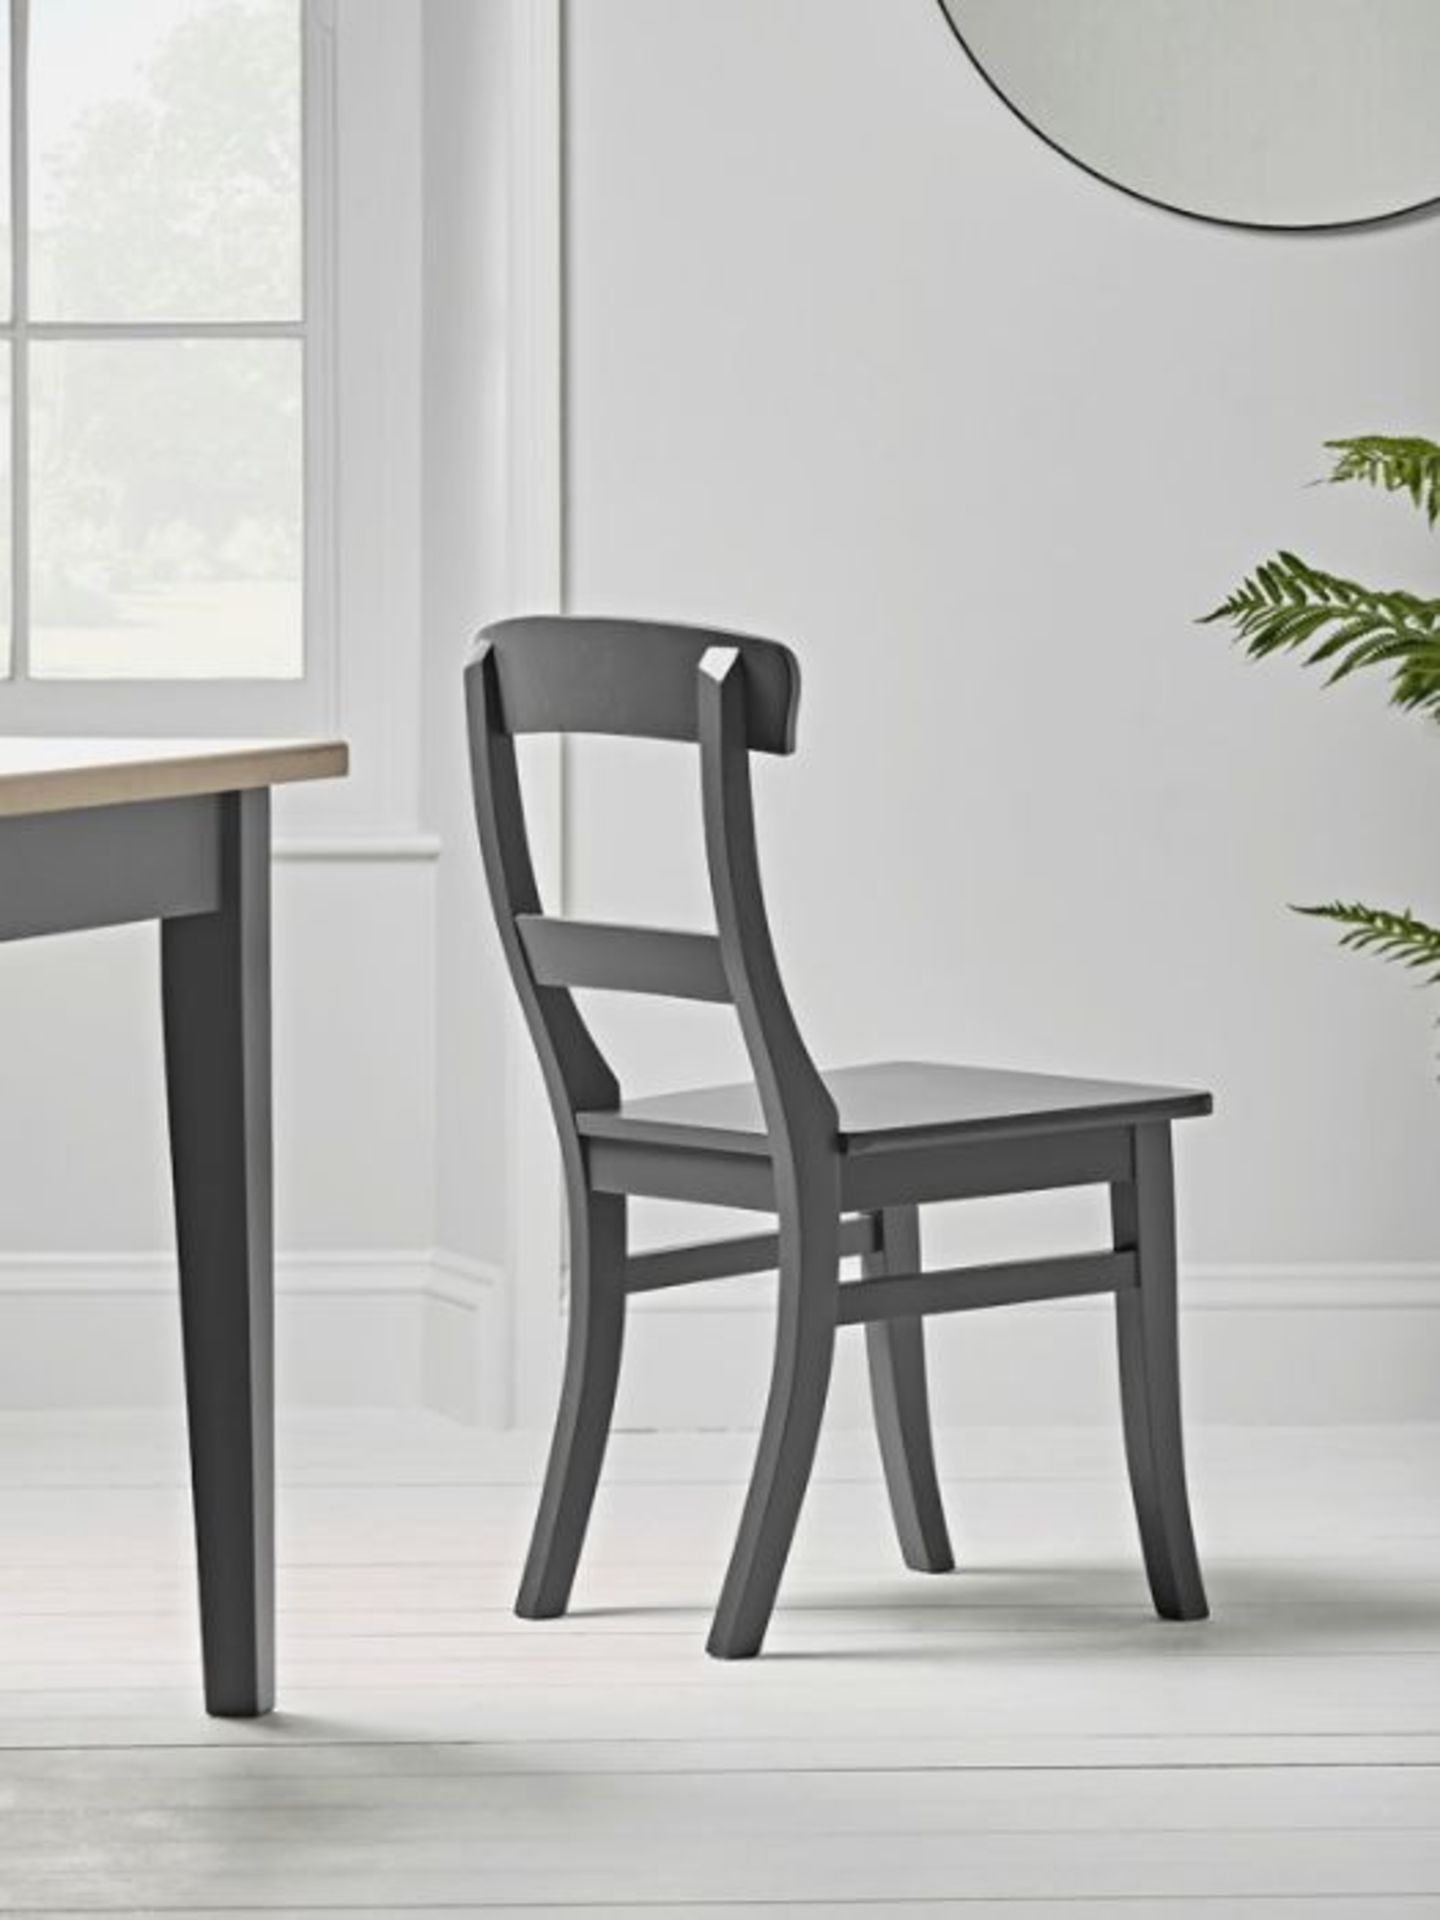 Cox & Cox Mette Wooden Dining Chair RRP ?225.00 SKU COX-AP-1228370-B The clean, timeless form of our - Image 2 of 2